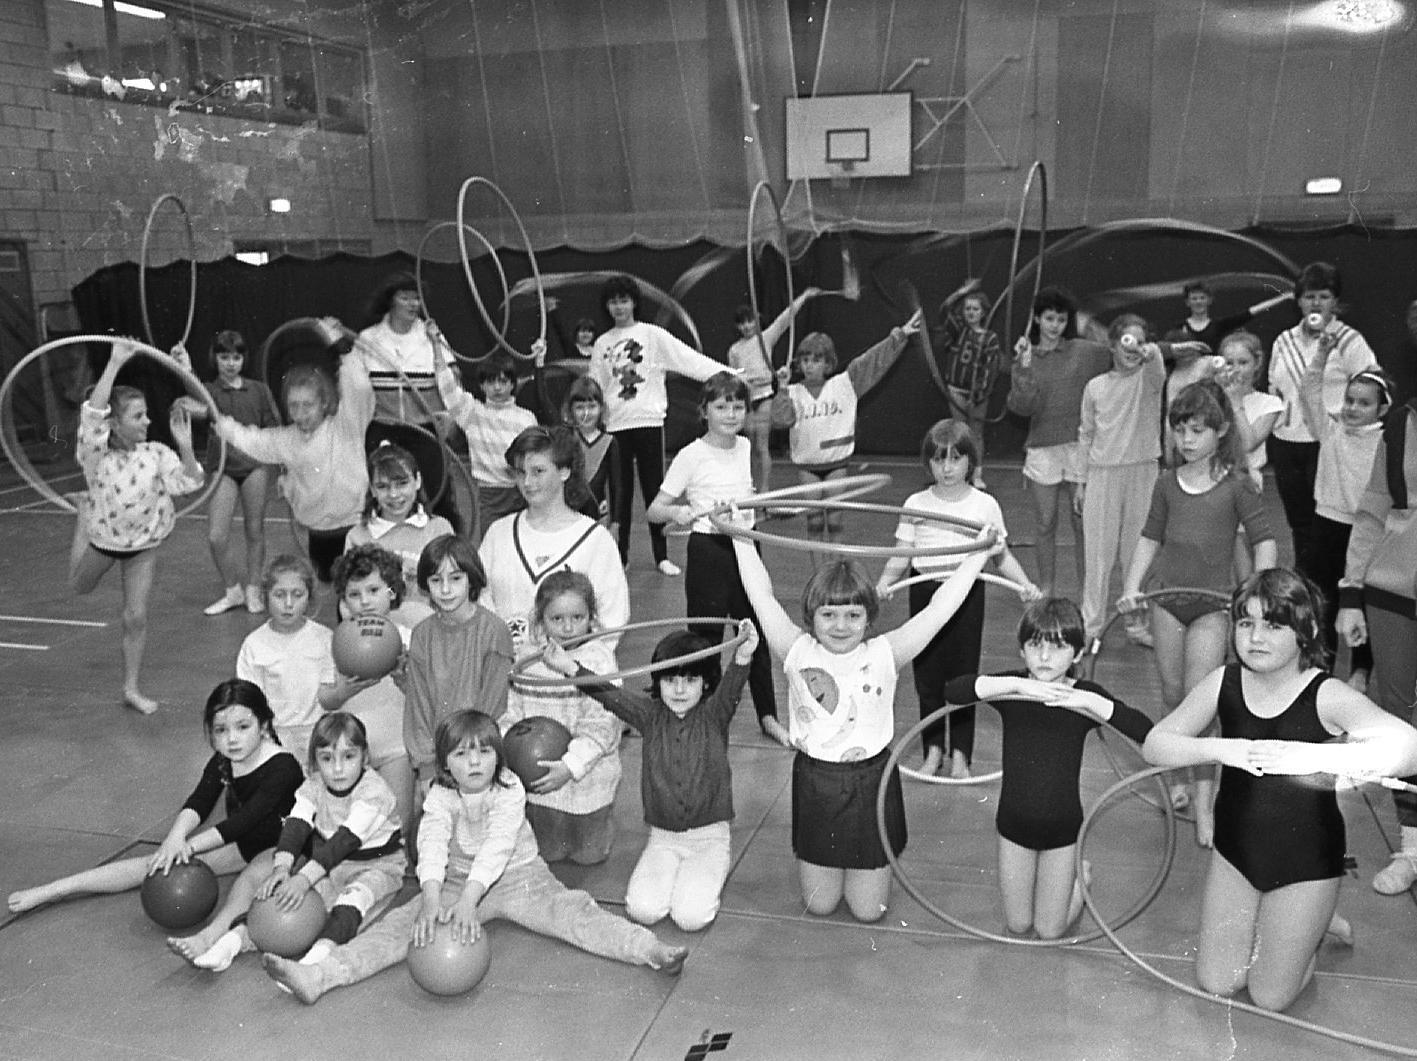 Half-term was a busy time for staff at Bamber Bridge Leisure Centre, which ran an ambitious fun-packed play scheme for local children. Activities on offer included dancing, singing, games, squash, roller disco and rhythmic gymnastics. Pictured above are youngsters who enjoyed the rhythmic gymnastics